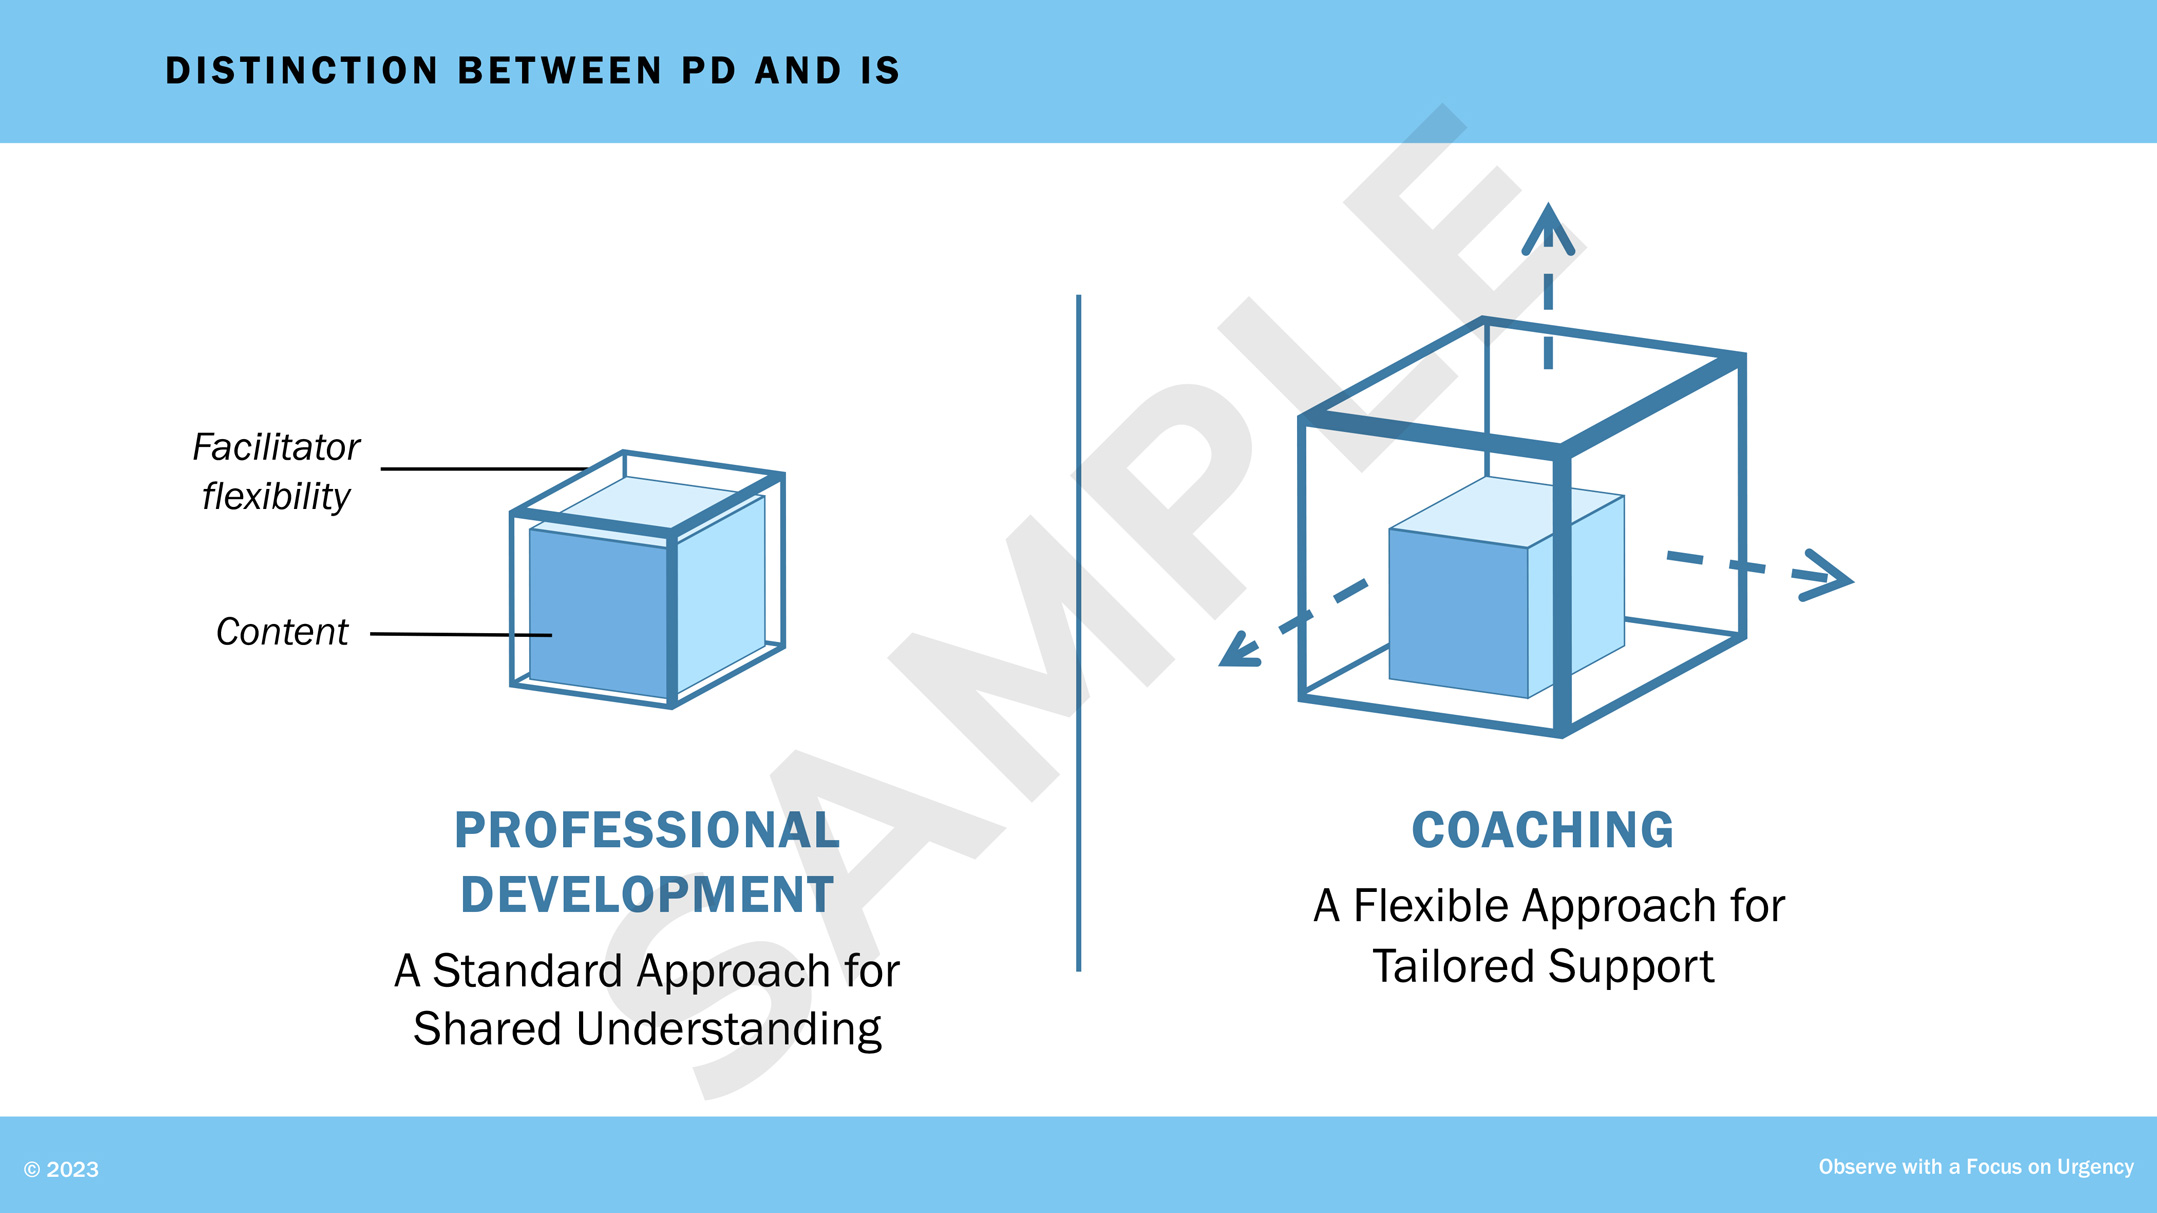 Slide from a PowerPoint presentation for a learning series for teachers. An infographic shows the difference between professional development and coaching. A cube within a snug container represents professional development. A cube within a container that is large and expanding represents coaching; arrows pointing outward represent expansion.